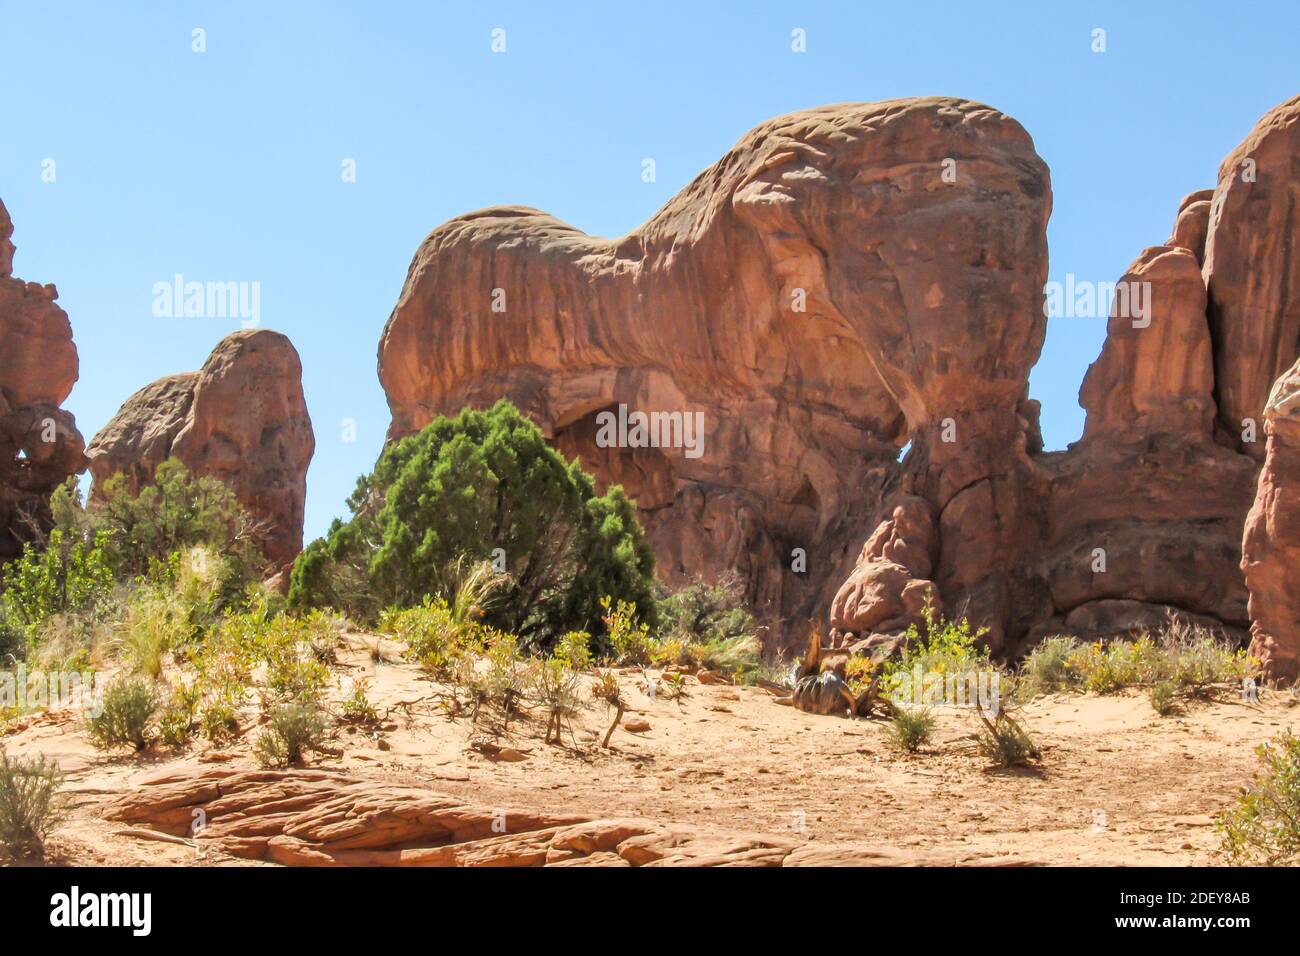 The sandstone buttes in Arches National park, Utah, known as The Herd of Elephants, due to their iconic shape, on a sunny afternoon Stock Photo